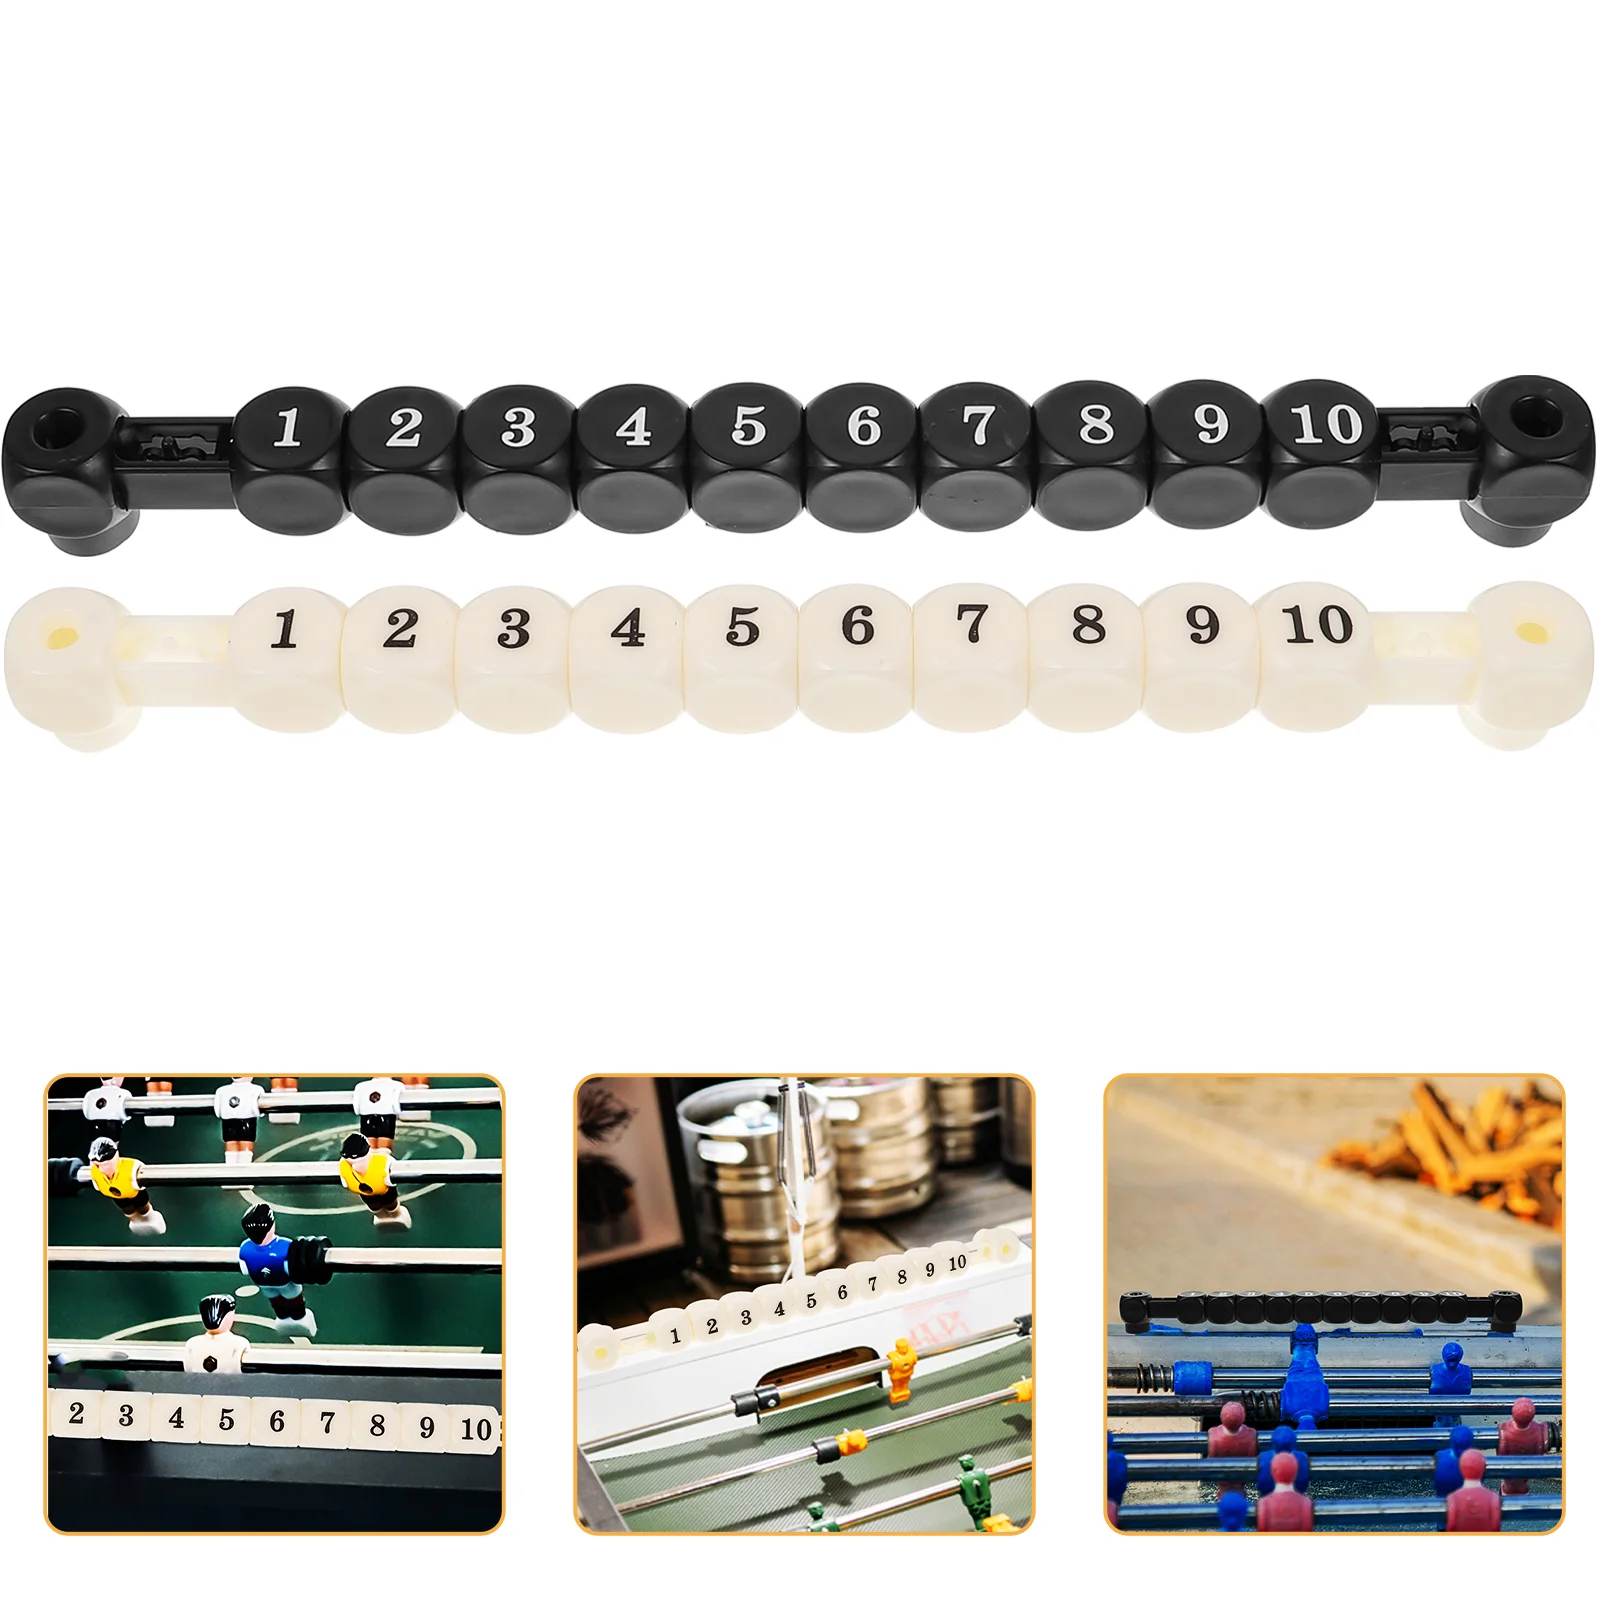 2Pcs Scorekeeper for Foosball Table Foosball Score Counters Table Score Keepers Scoring Markers 2pcs electronic finger counters ring counters handheld tally counters chanting buddha counters